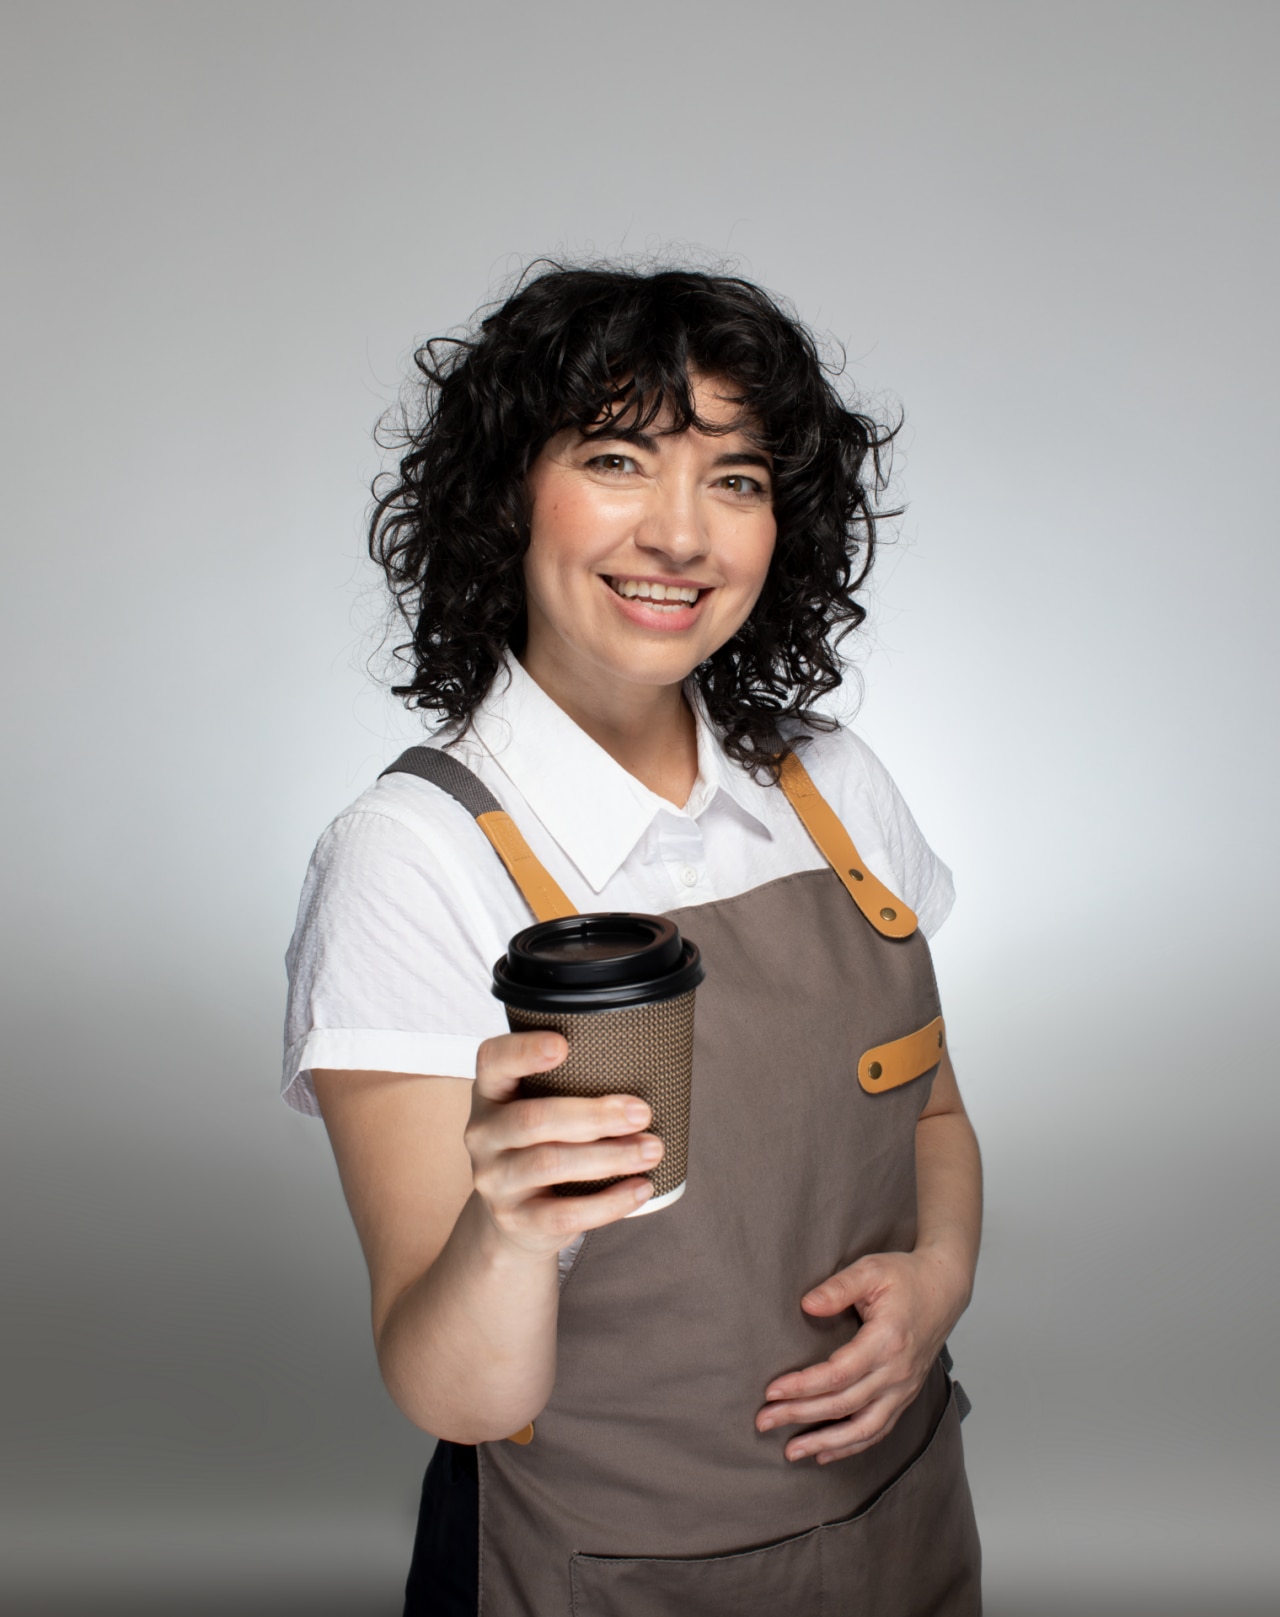 Smiling female barista standing with a big cup of coffee in her hand.